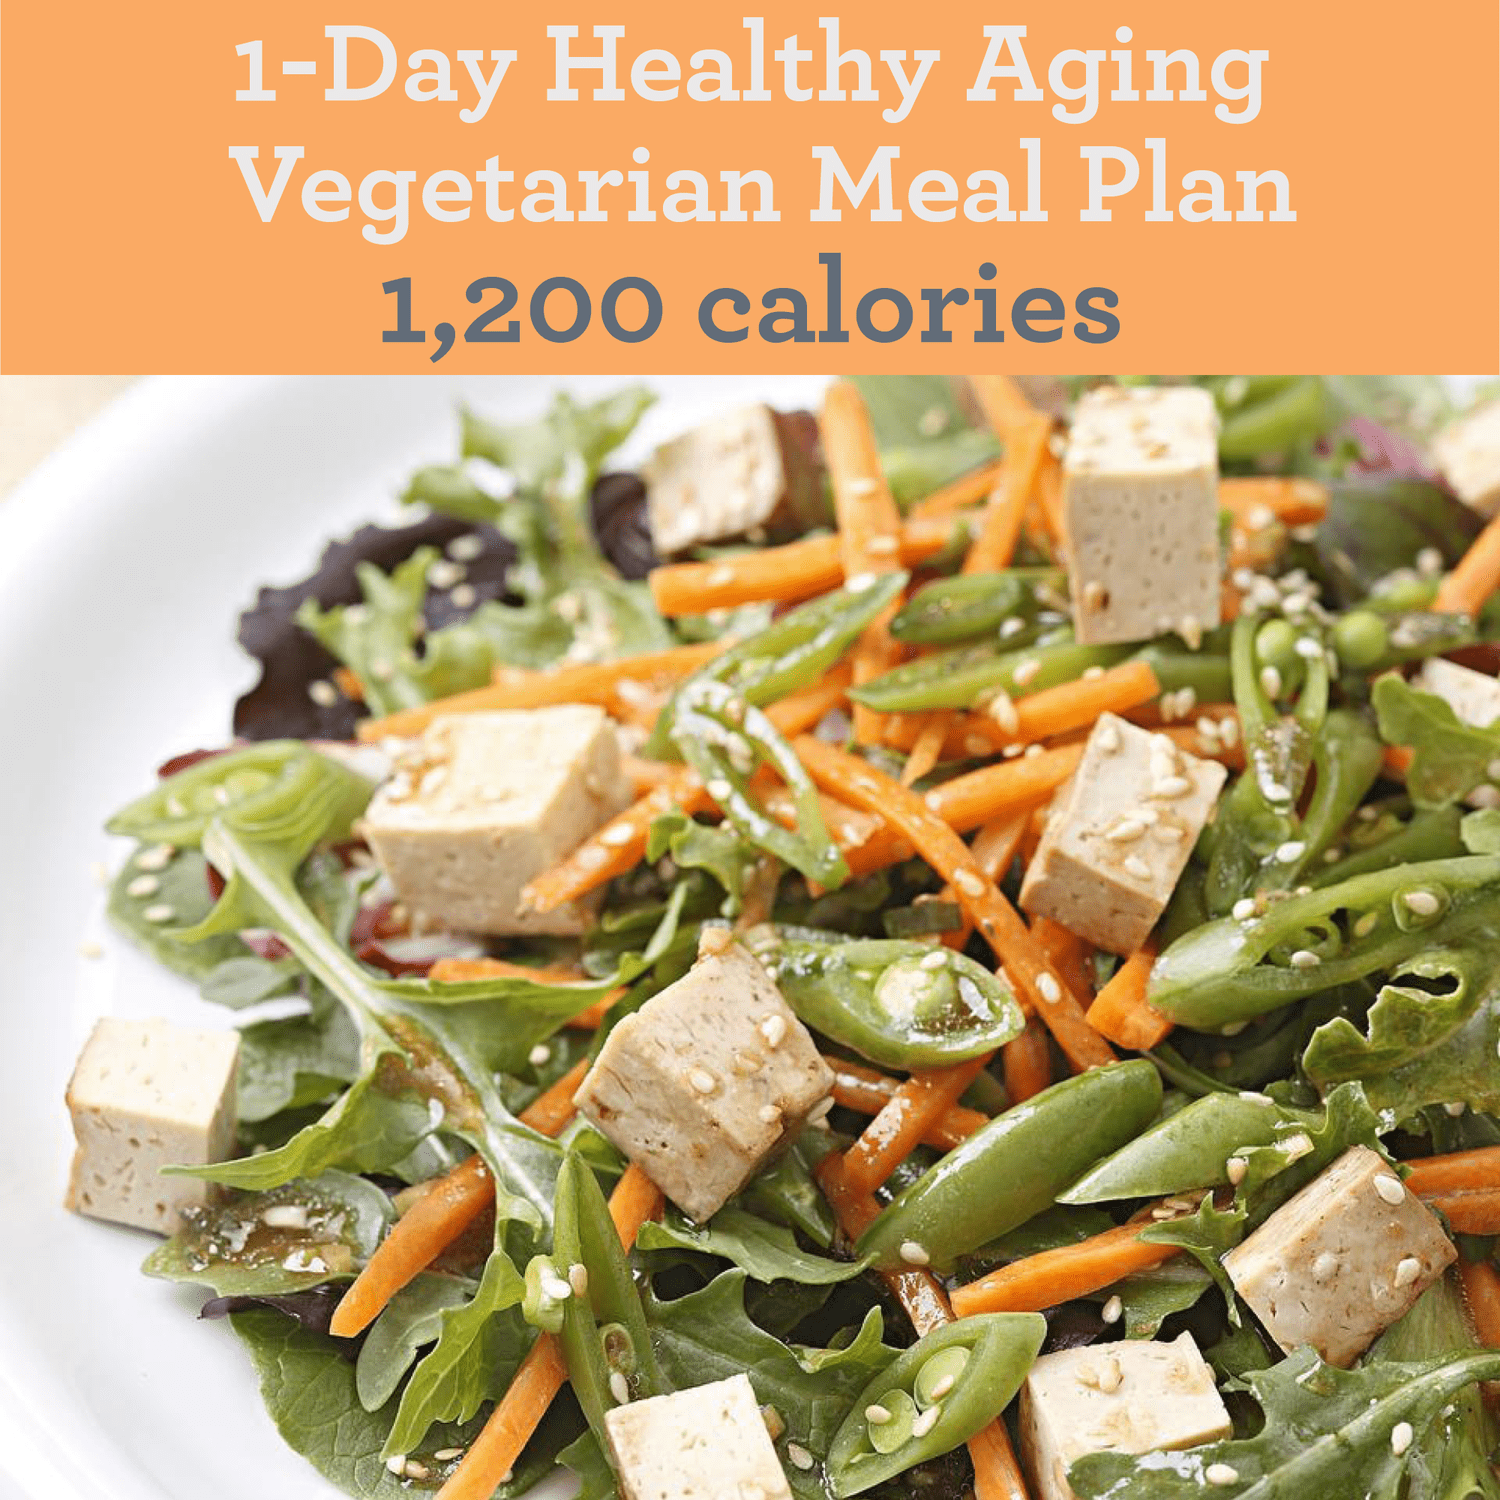 1-Day Healthy Aging Vegetarian Meal Plan 1,200 Calories